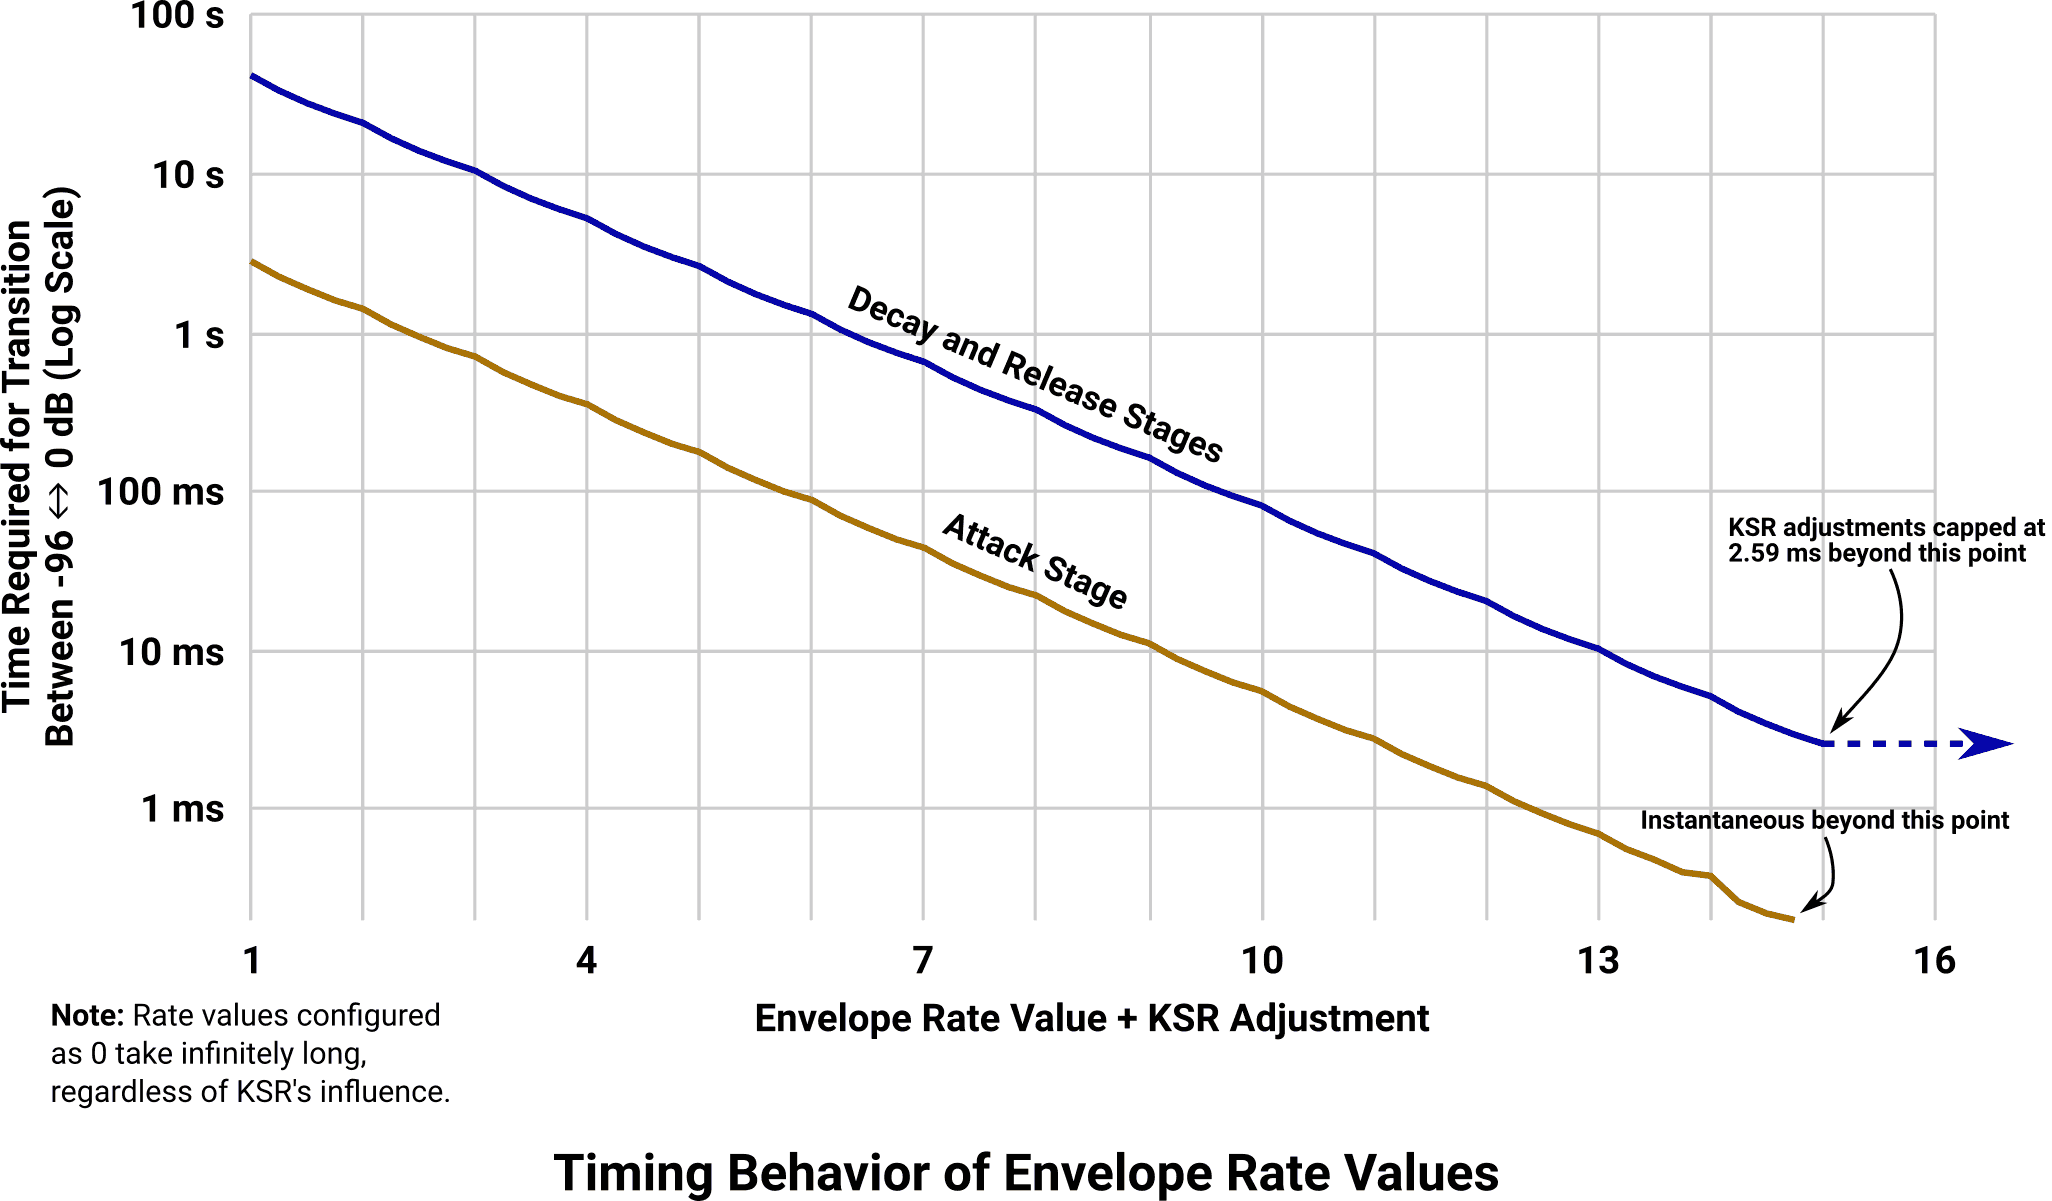 Graph showing the timing behavior of attack/decay/release rates.